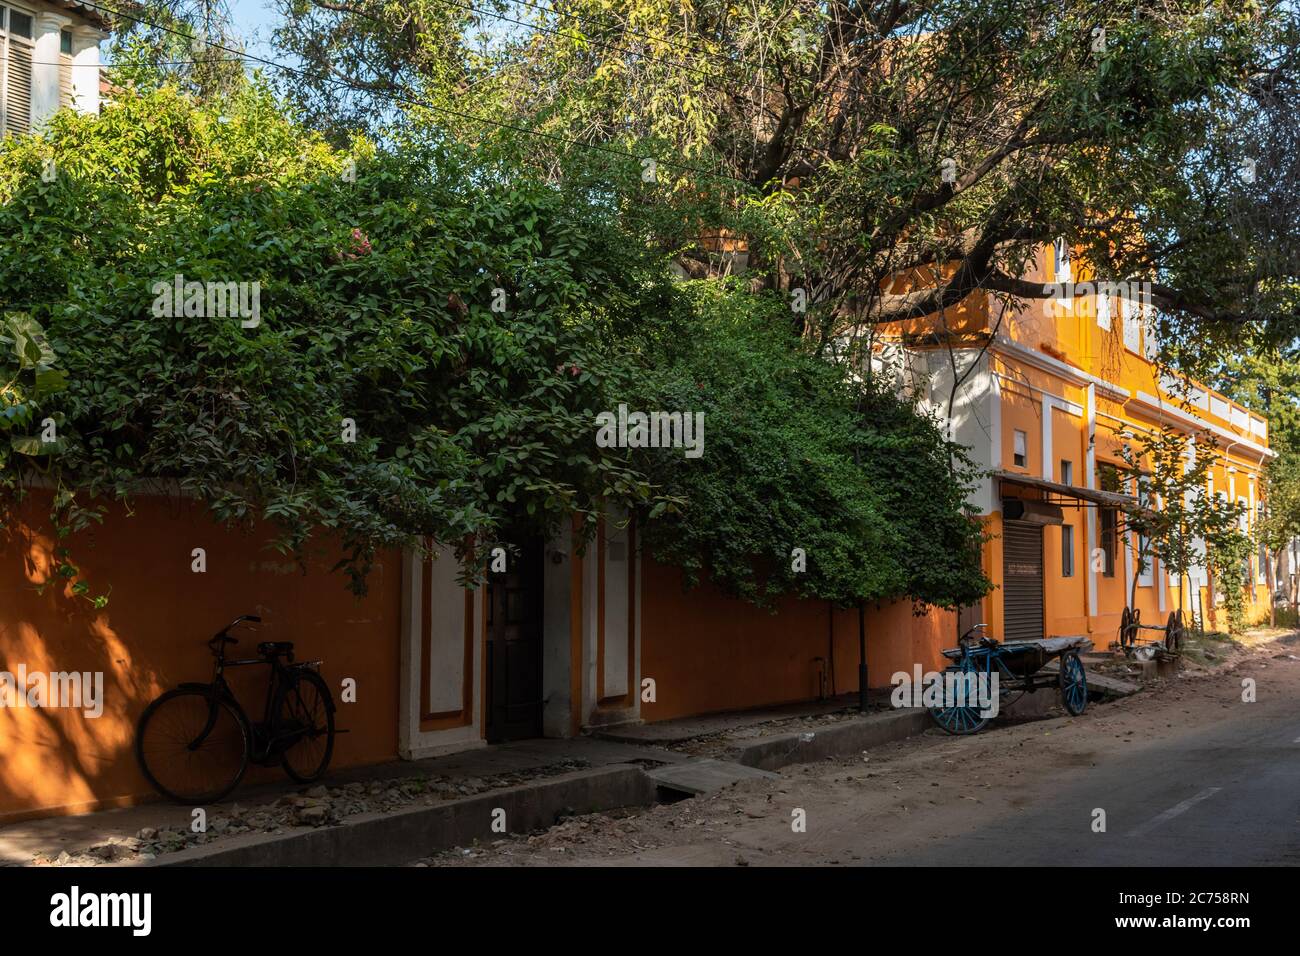 Pondicherry. India - February 2020: A street in the French Quarter of the White Town lined with old French era yellow orange houses  and lush foliage. Stock Photo